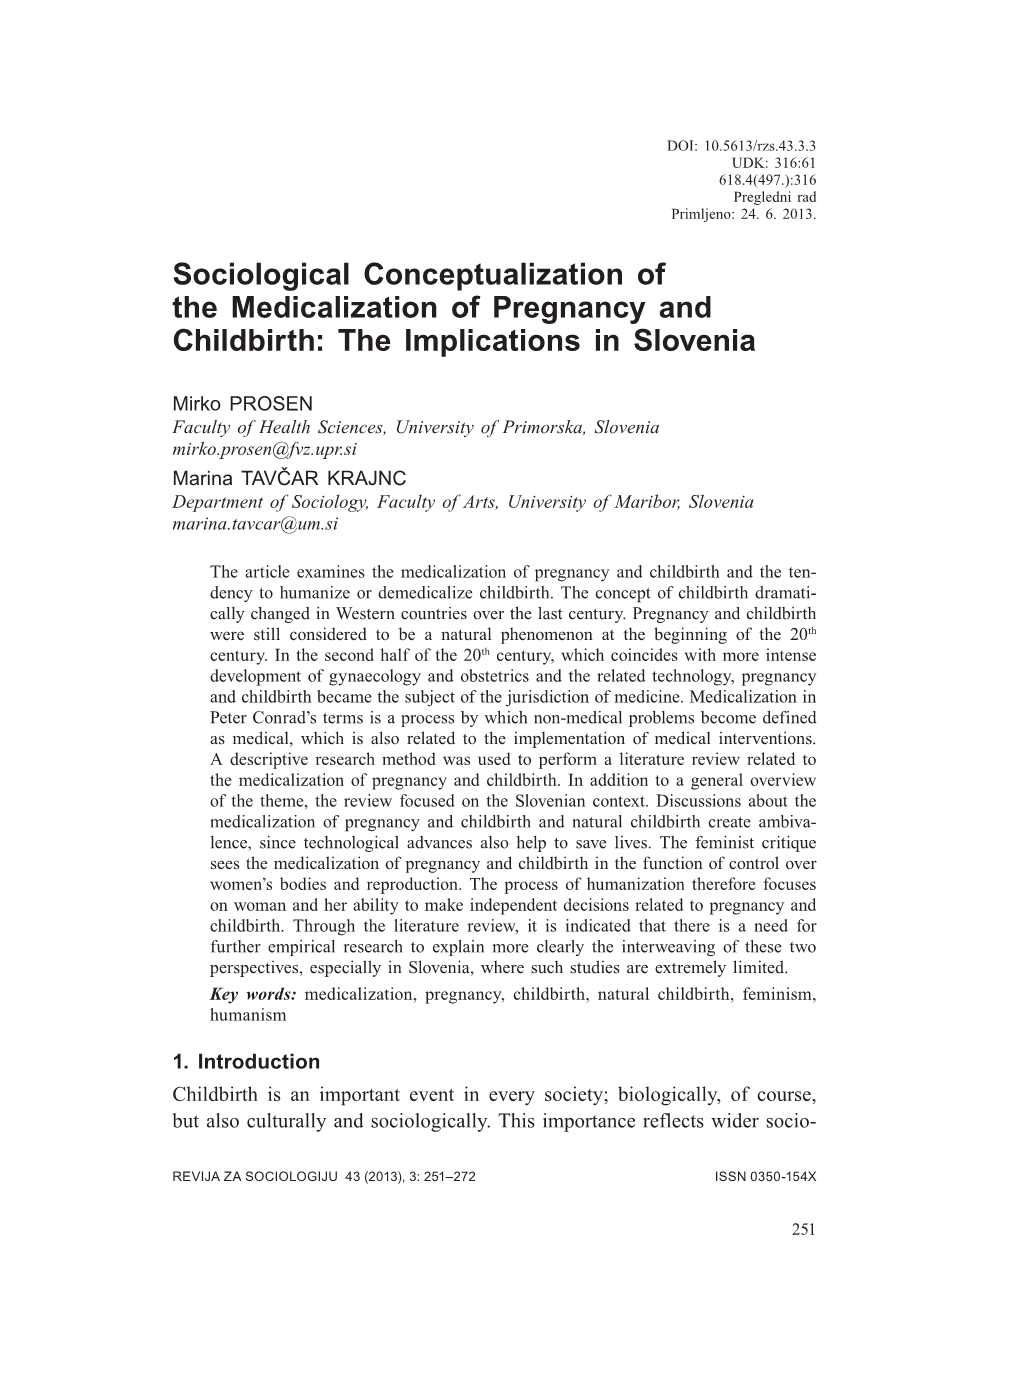 Sociological Conceptualization of the Medicalization of Pregnancy and Childbirth: the Implications in Slovenia